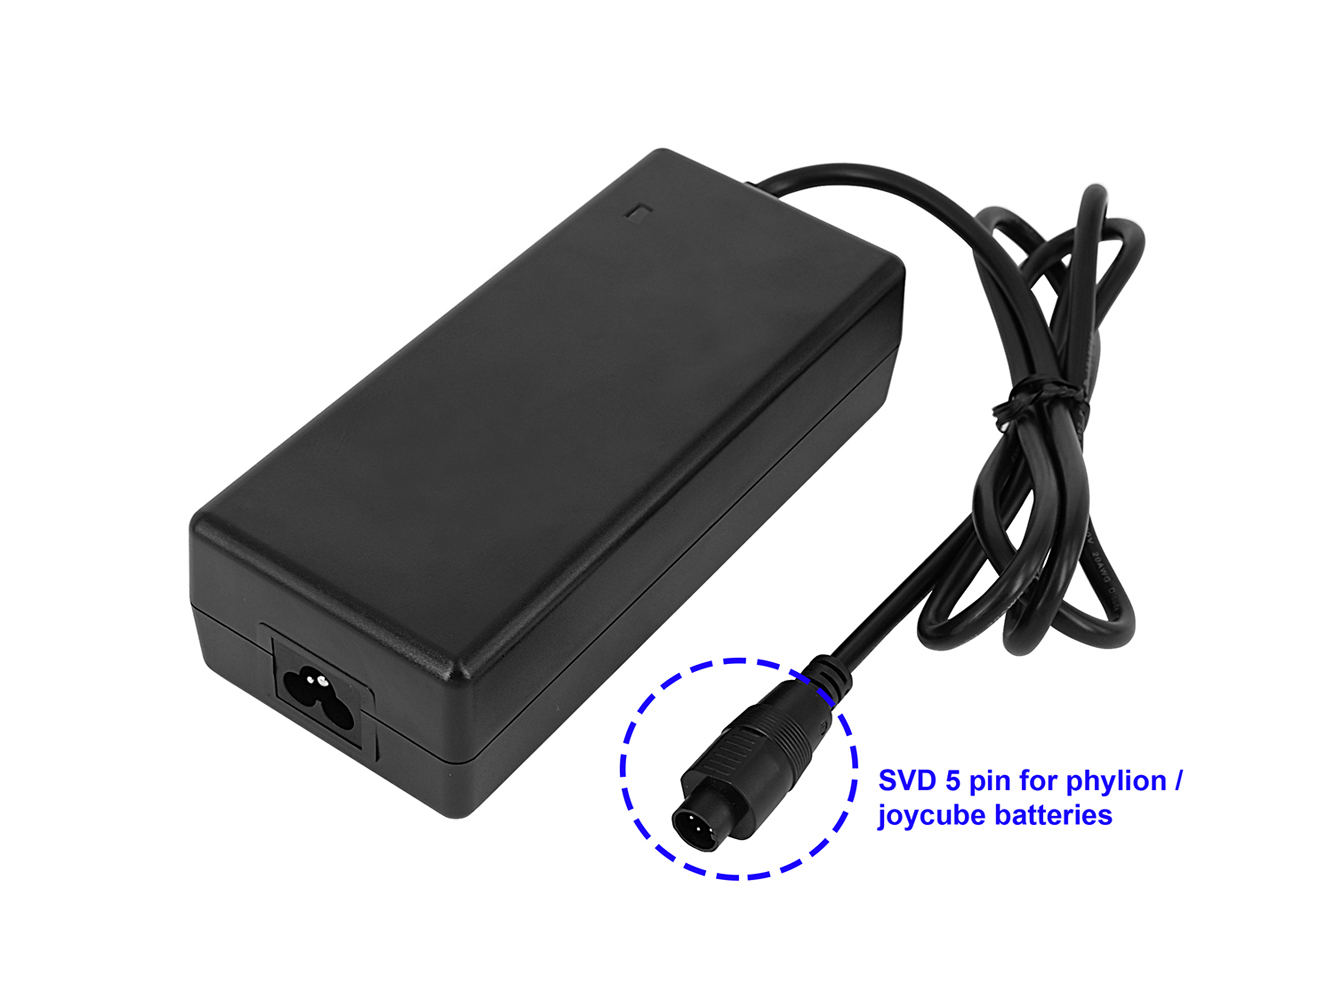 42V 2A SVD 5 pin charger for e-bikes fitted with Joycube, Phylion 36V Lithium Batteries